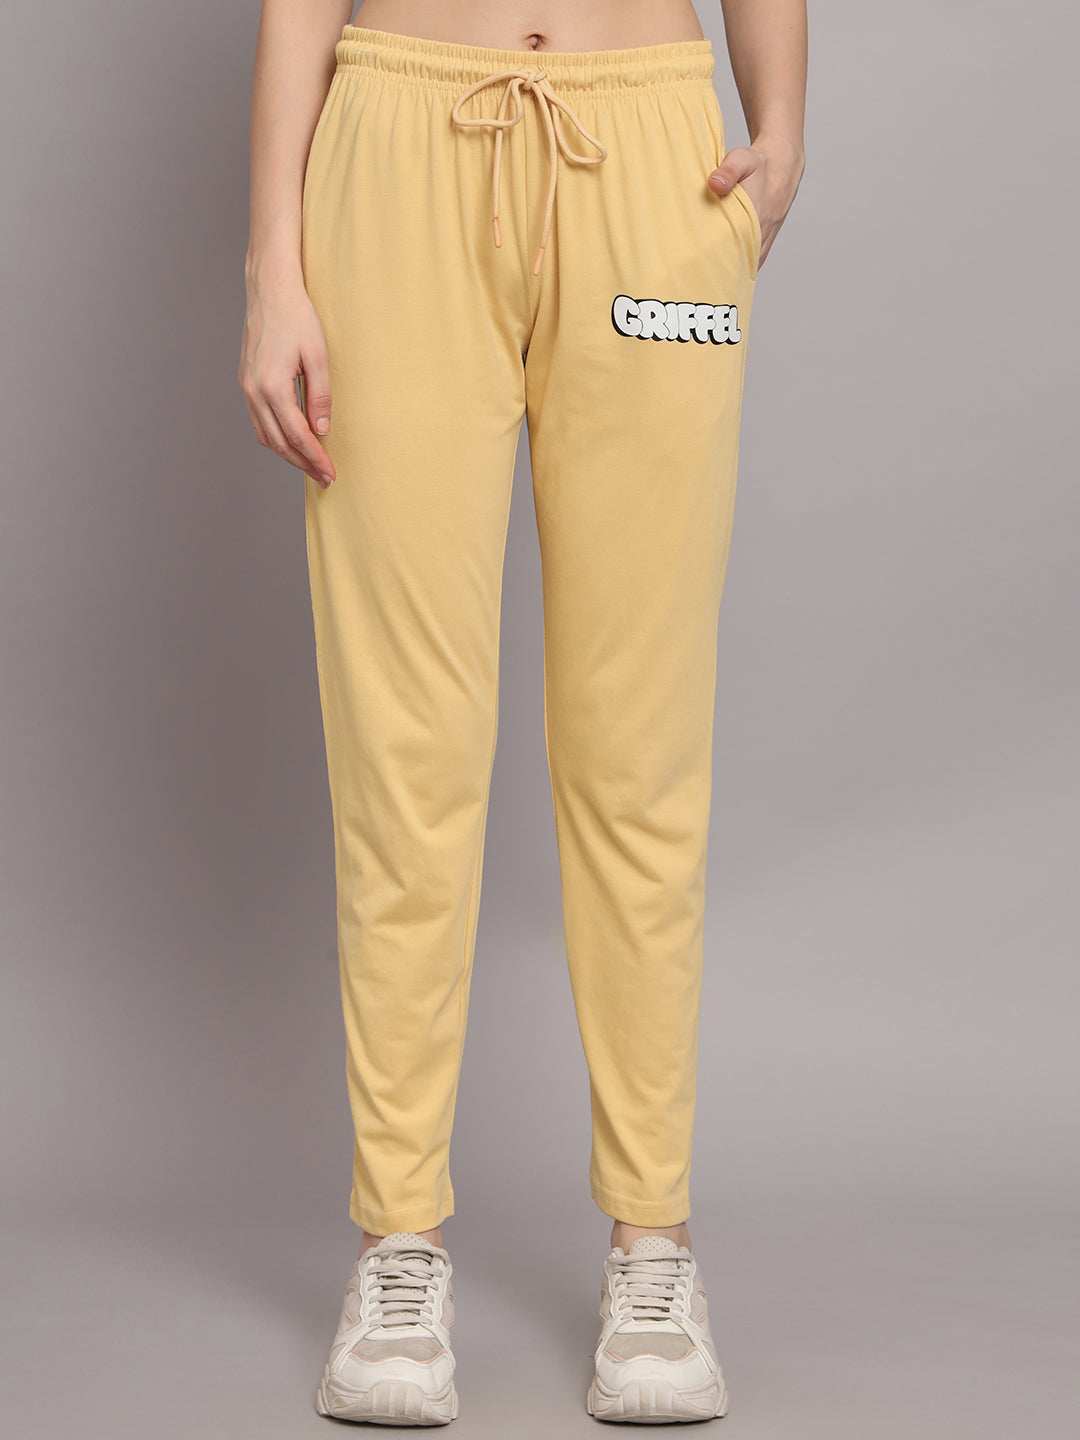 GRIFFEL Women Printed Oversized Loose fit Light Yellow T-shirt and Trackpant Set - griffel